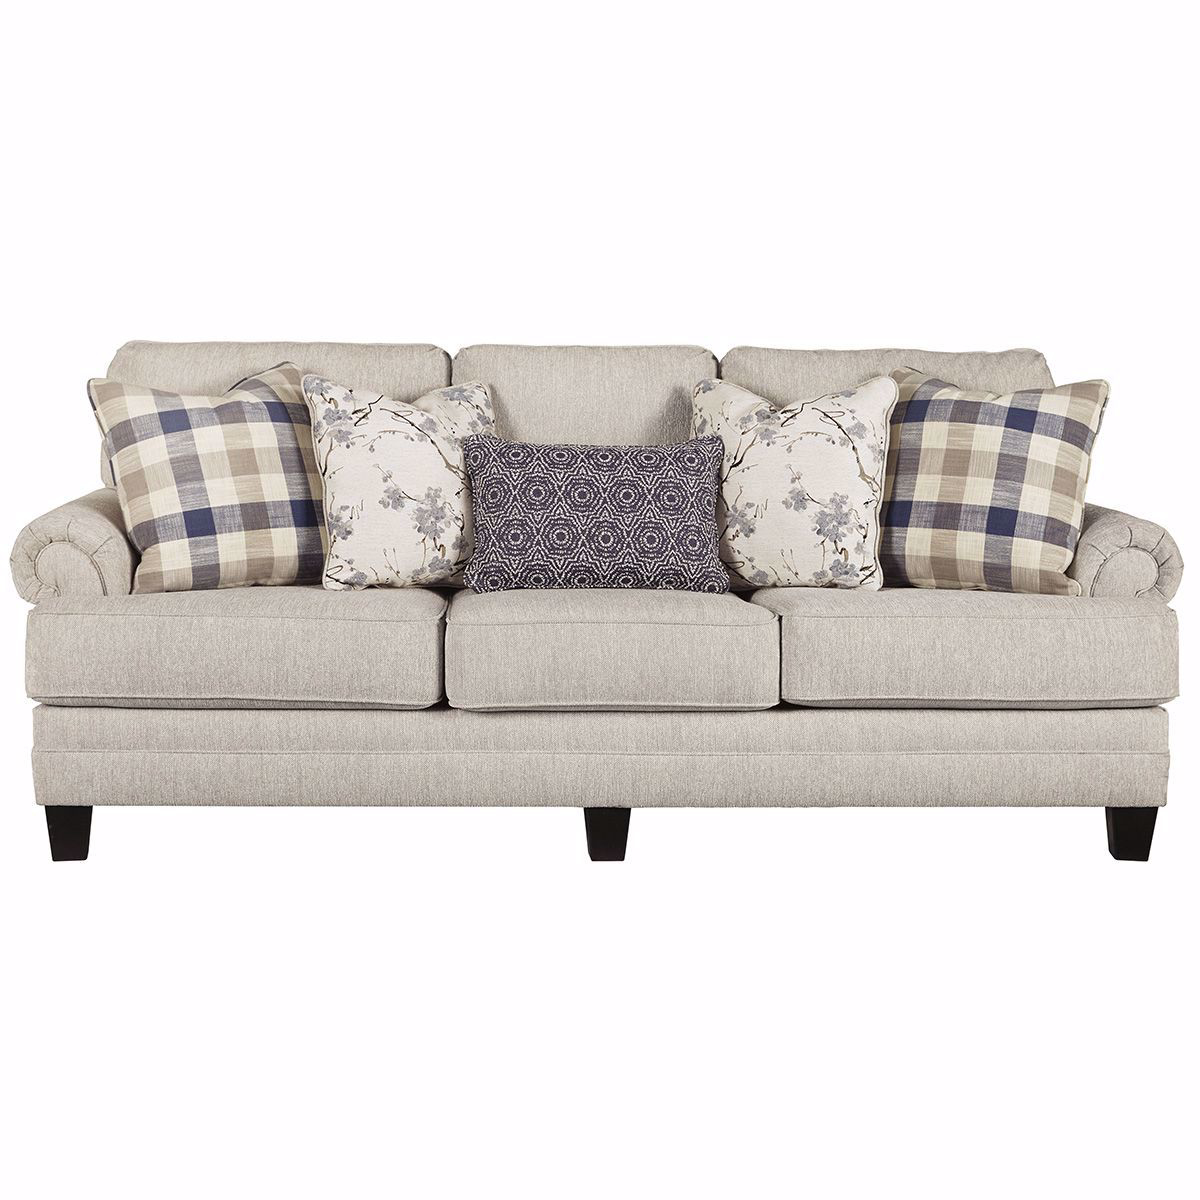 Picture of Dogwood Sofa